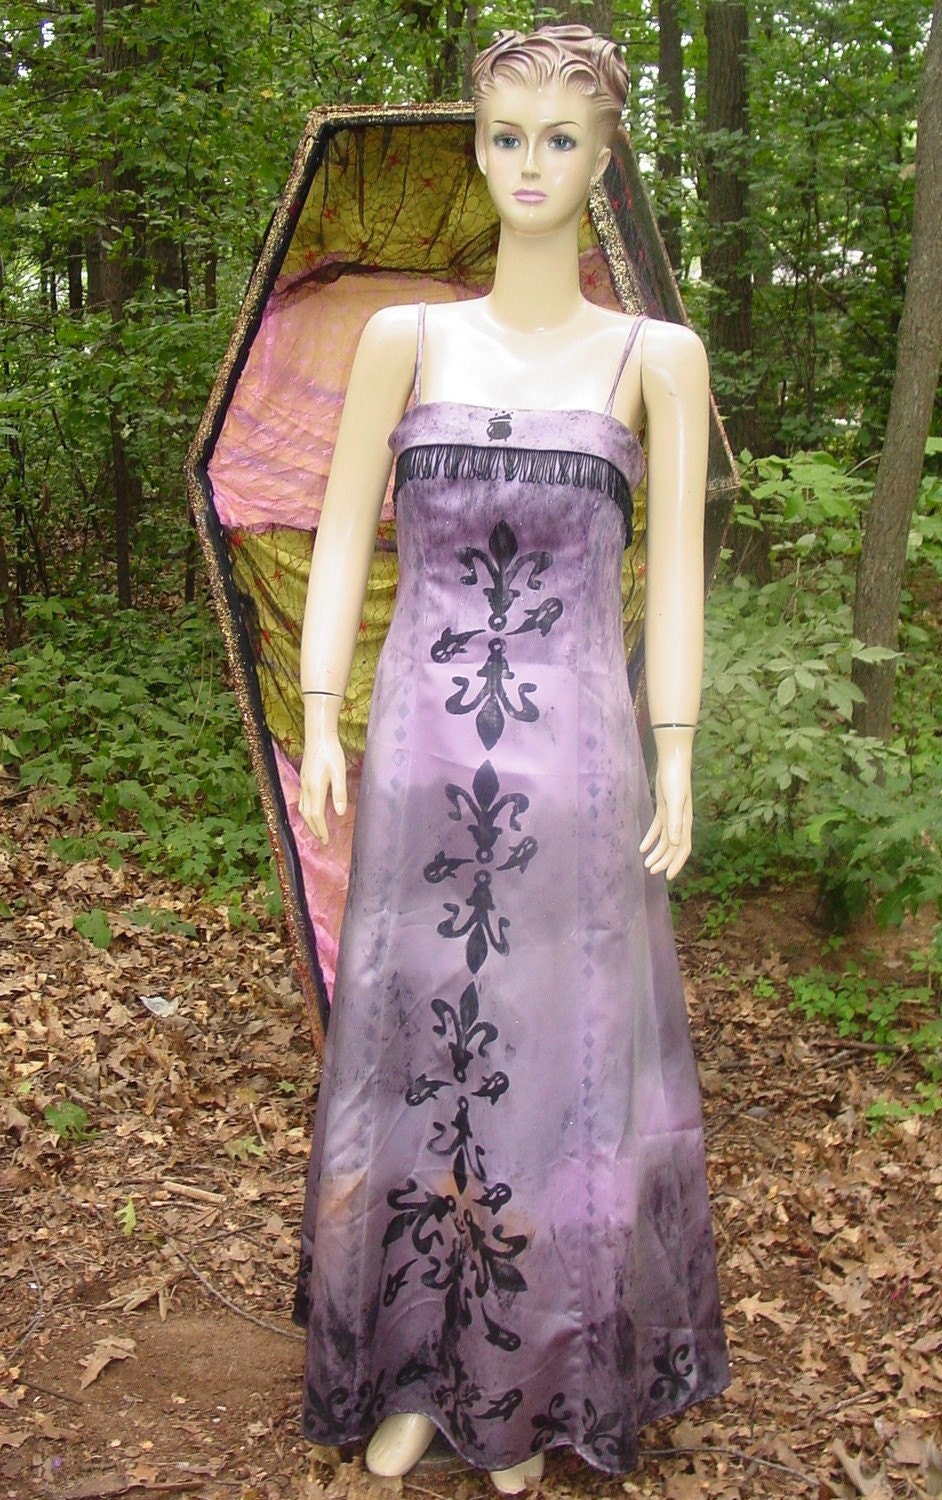 handmade VAMPIRE GOWN with ghosts,spiders and caldron HALLOWEEN COSTUME or zombie prom